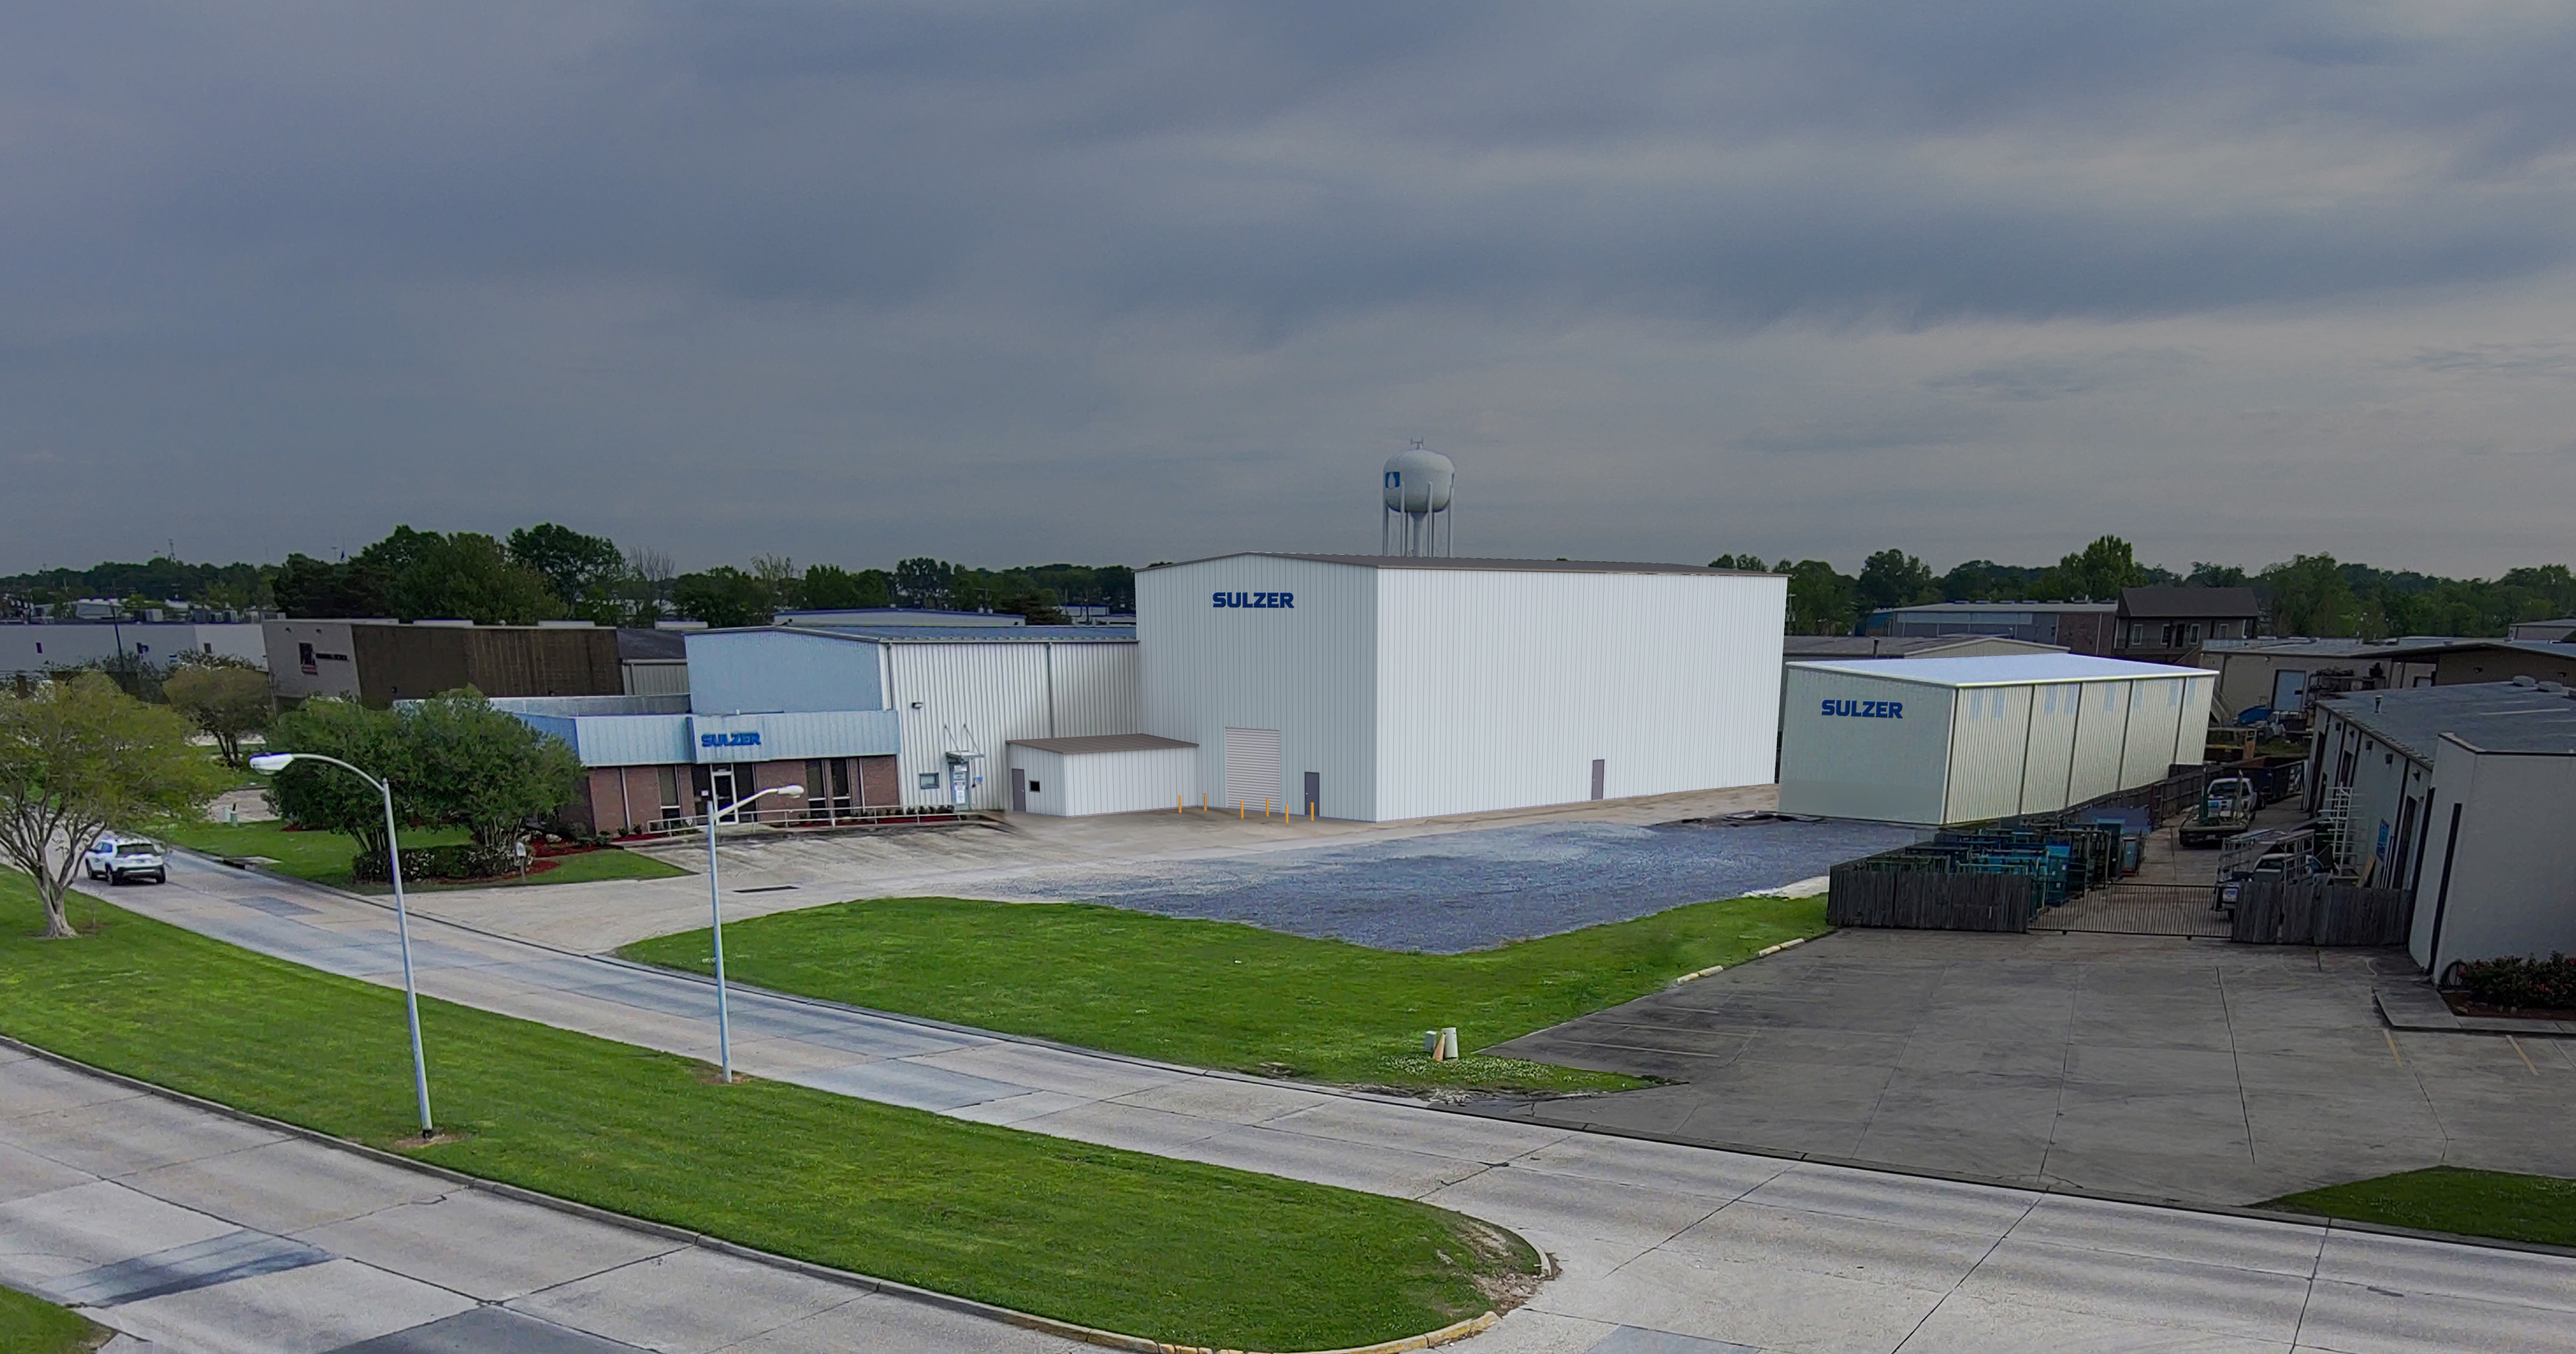 The expansion of the Baton Rouge Service Center will enhance the service capabilities and support for operators of rotating equipment in the US Gulf Coast area.